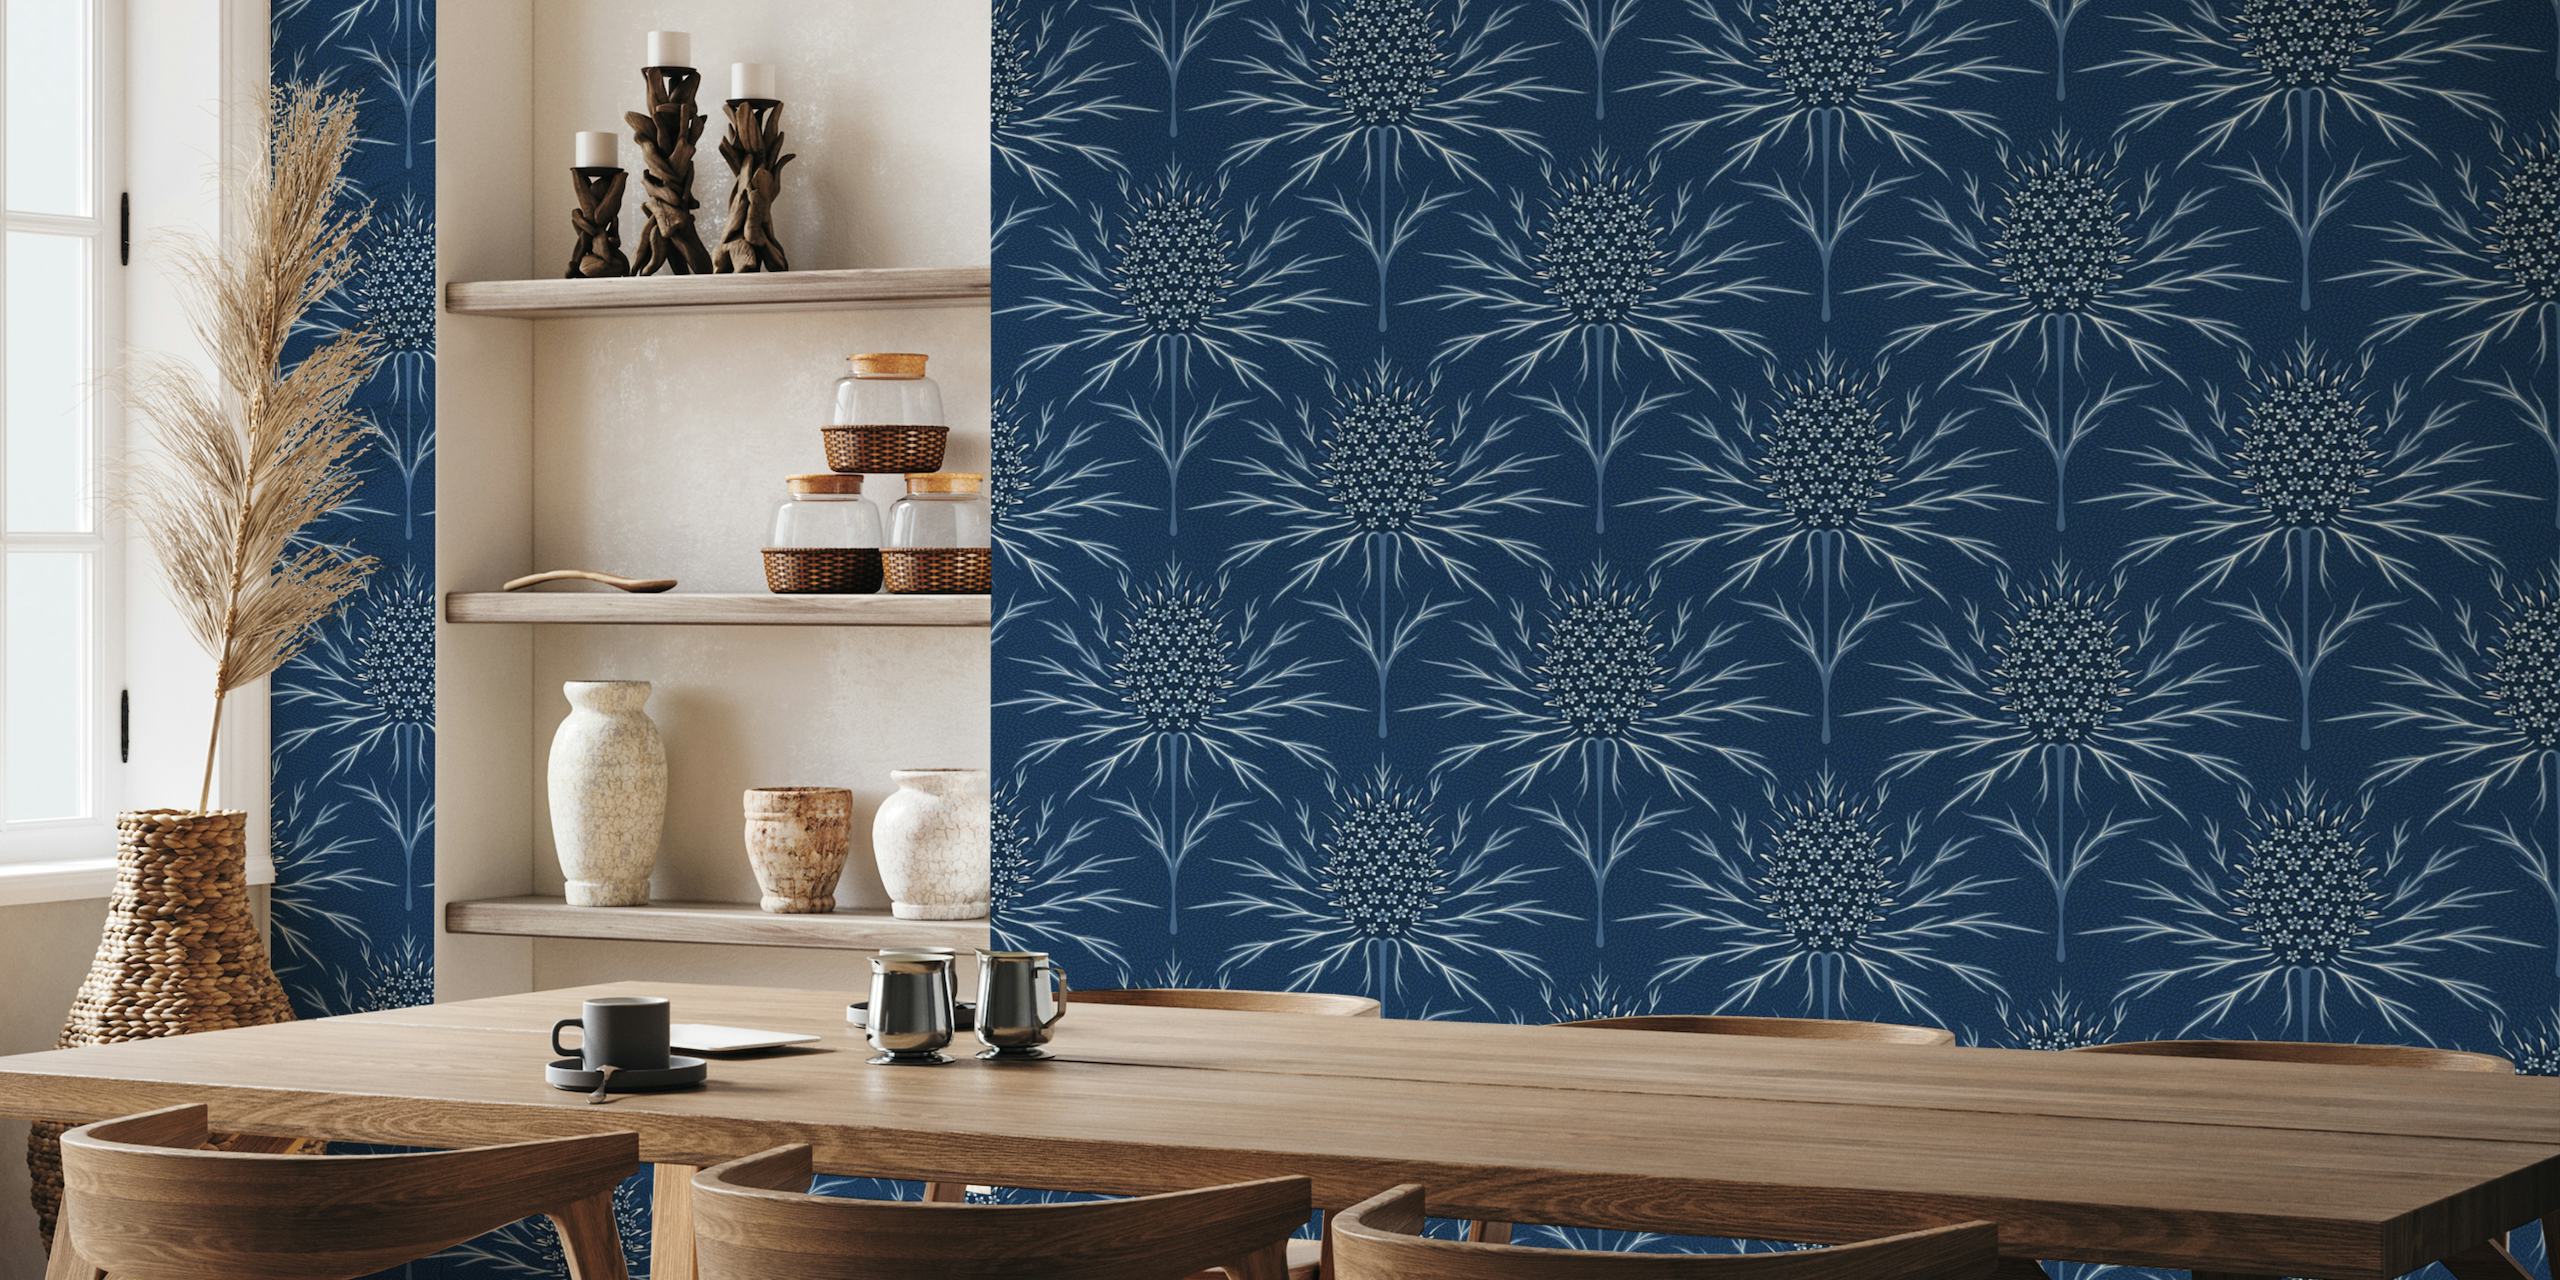 Maximalist thistle pattern on monochrome blue background wall mural